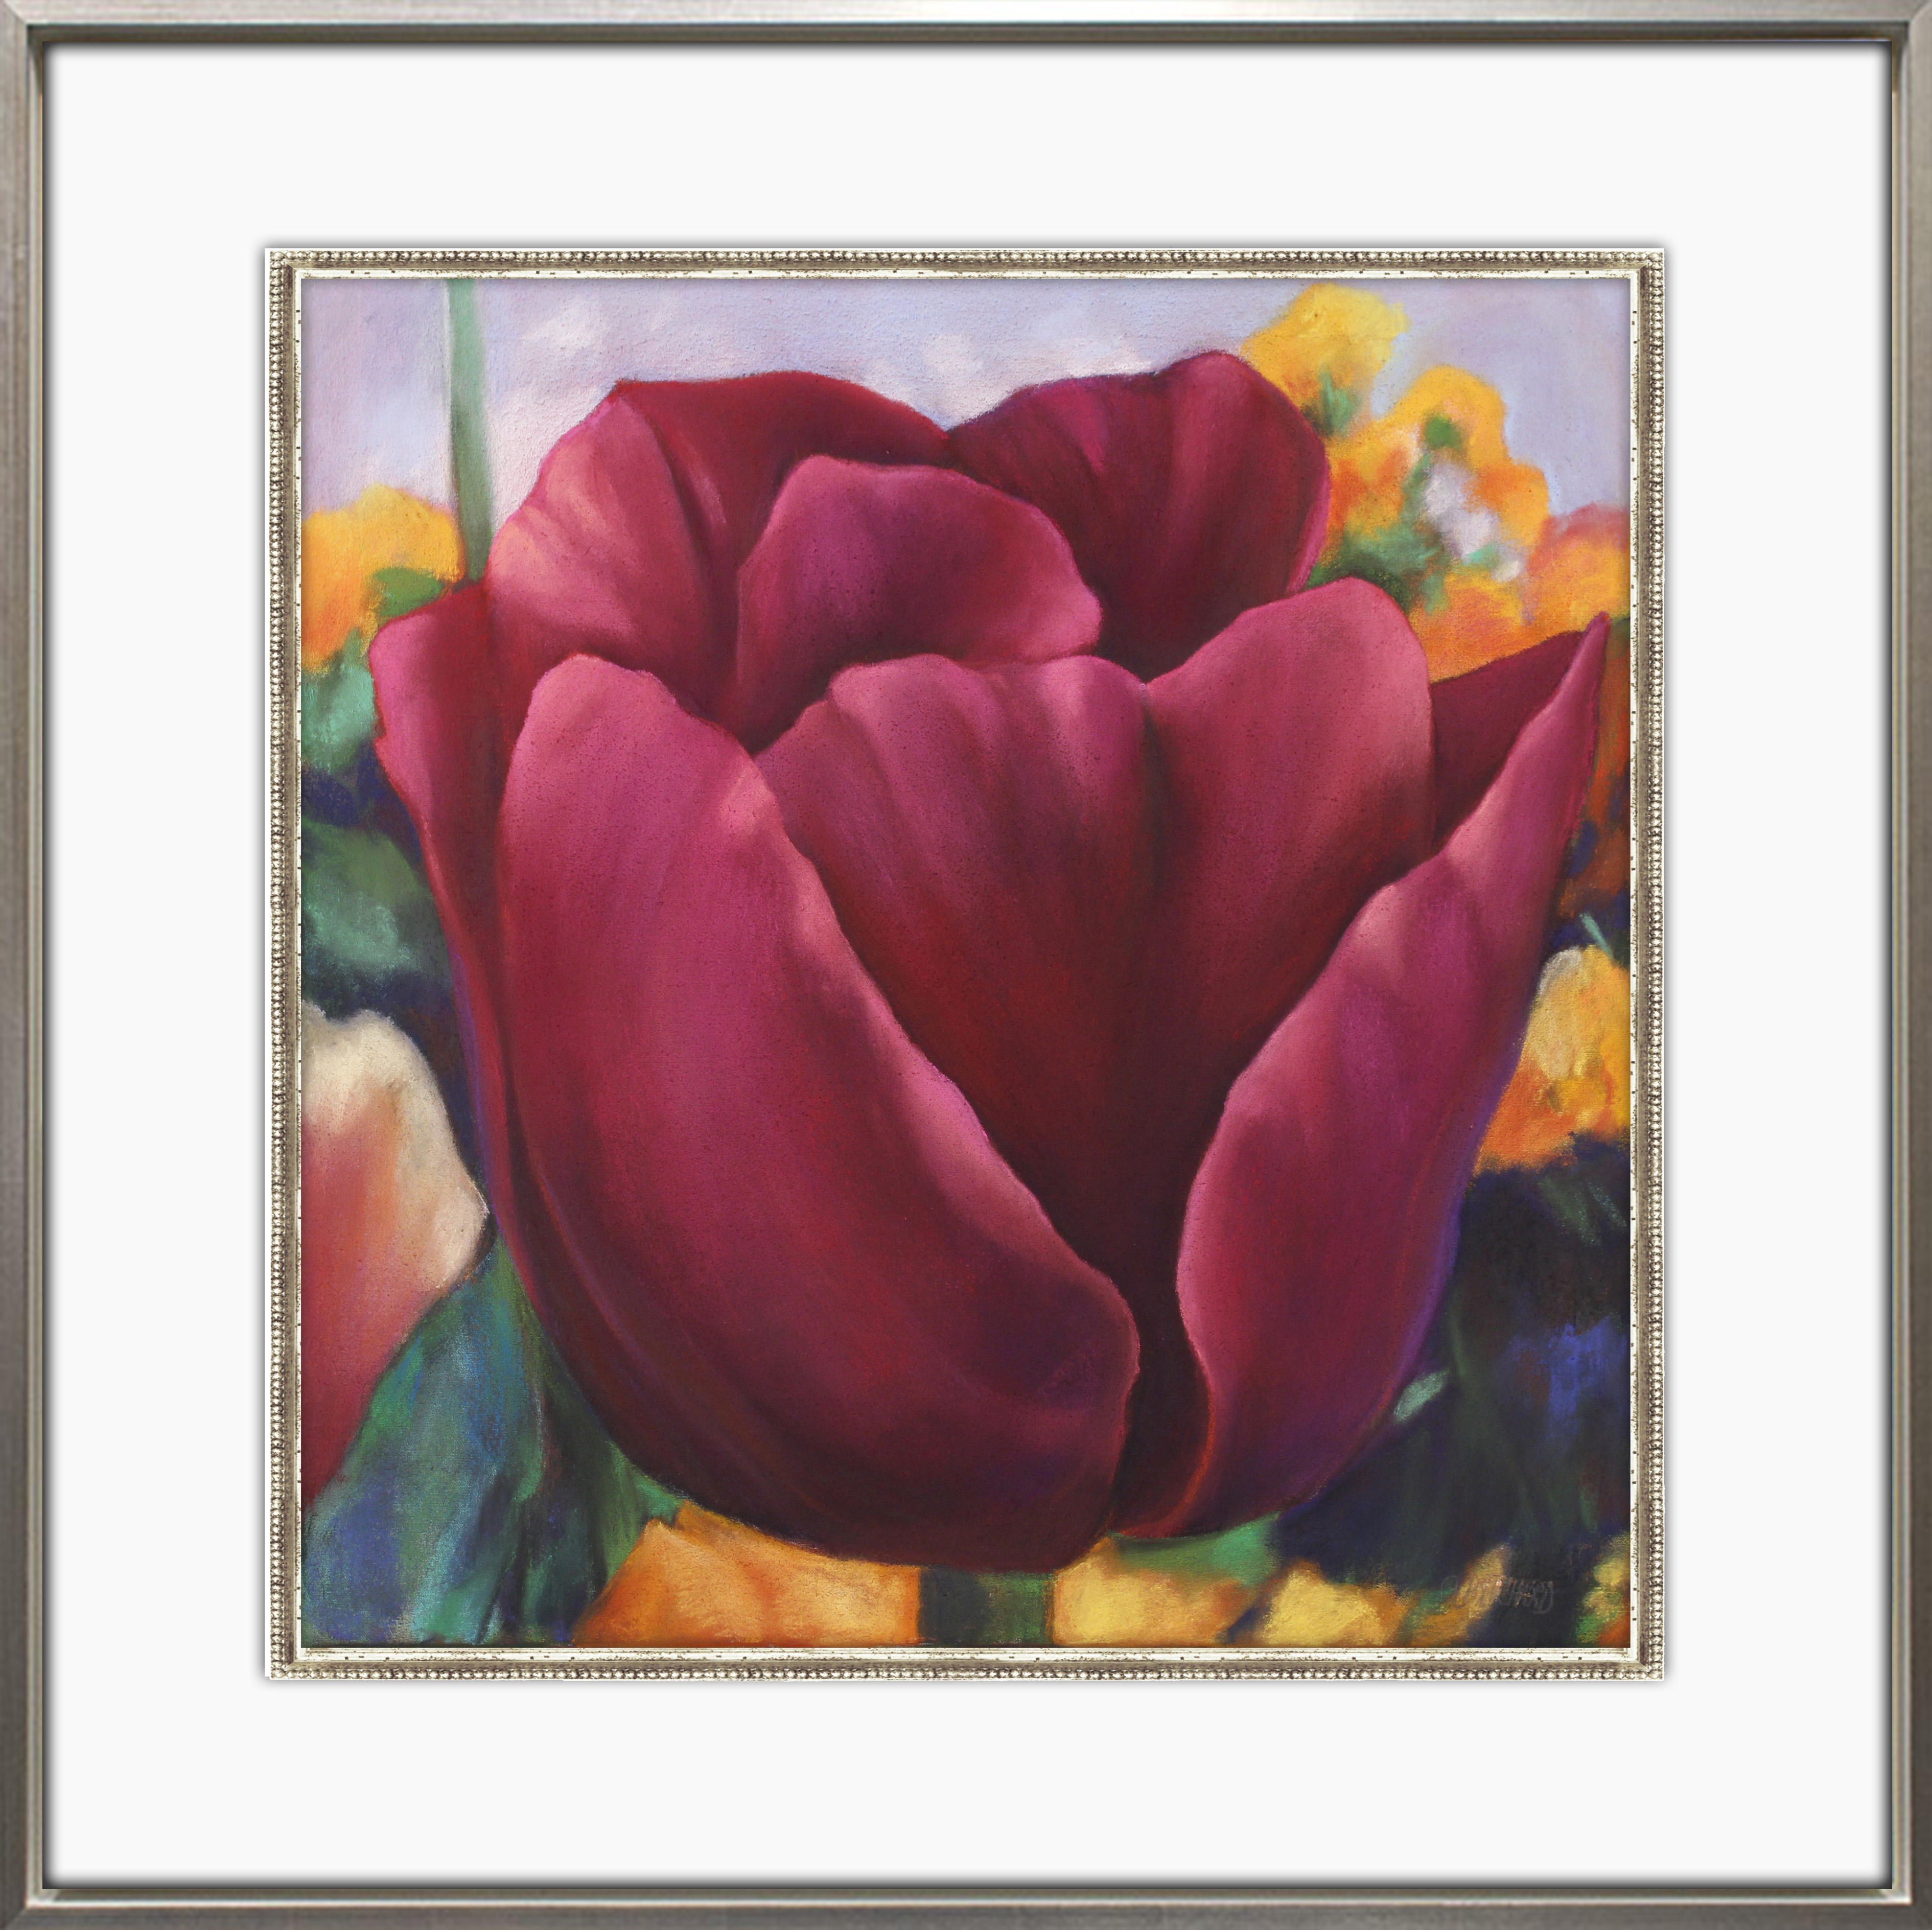 Pritchard, "Tulip IV," Pastel on Canvas, 28 x 28 in. 